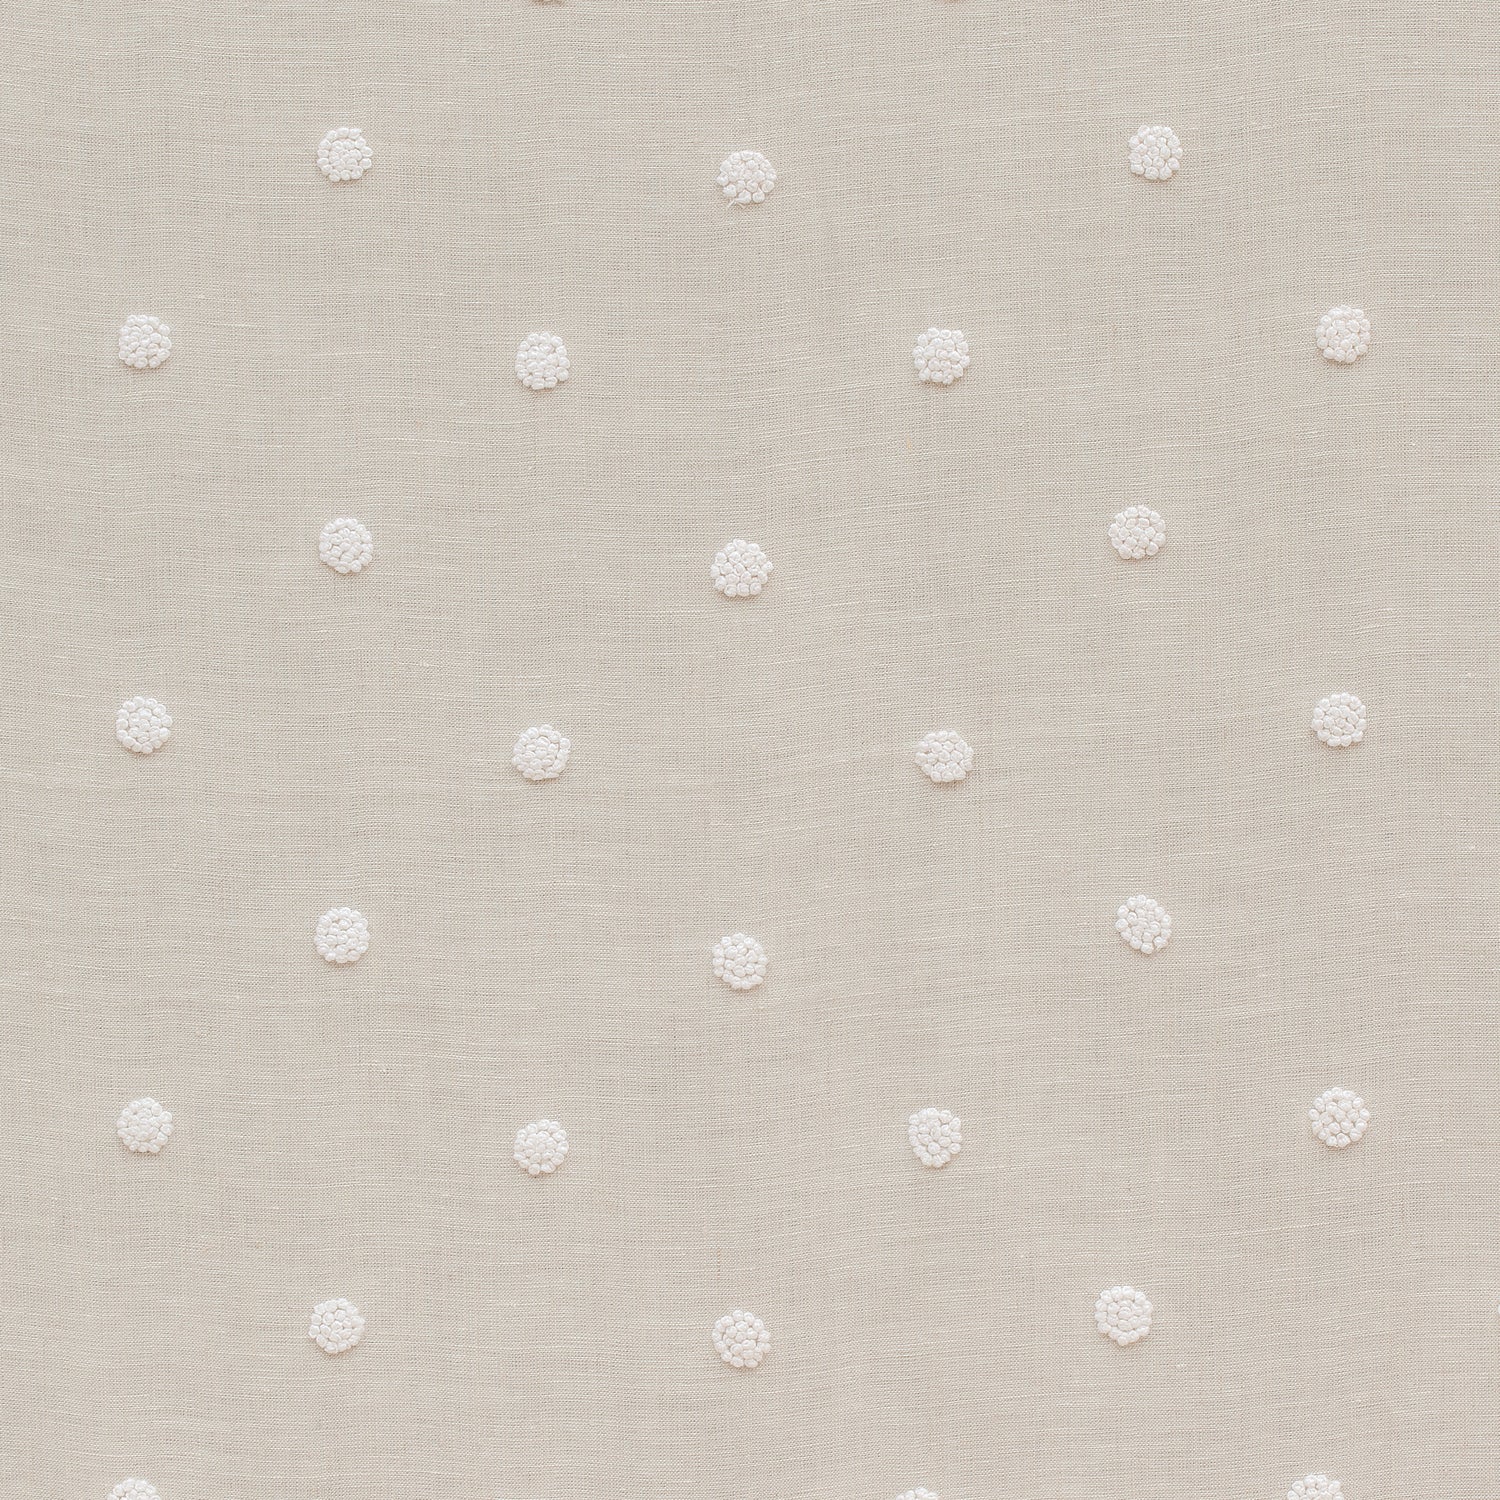 French Knot Embroidery fabric in flax color - pattern number AW73011 - by Anna French in the Meridian collection